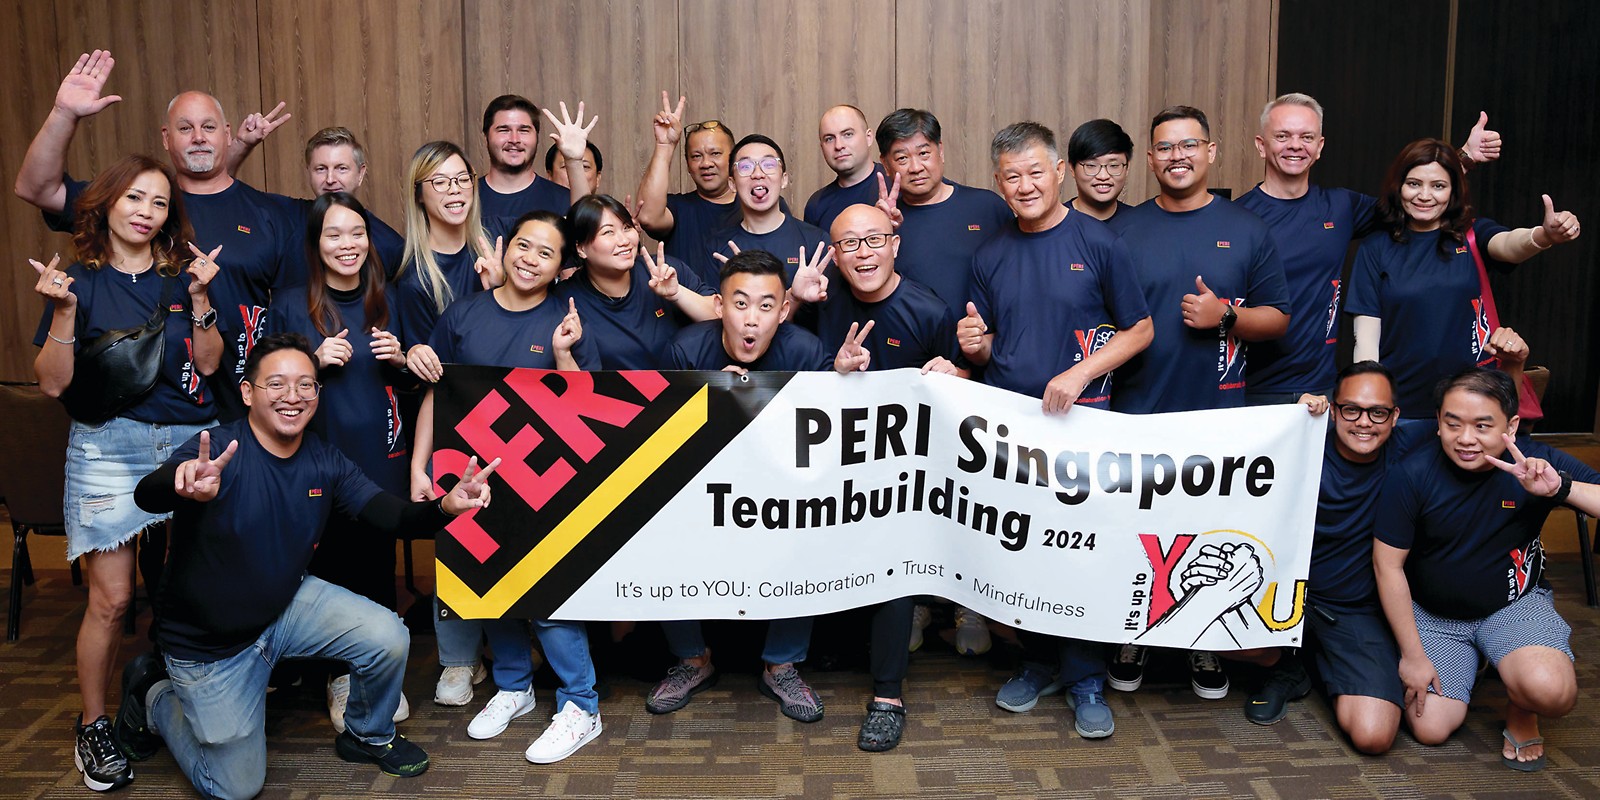 An energizing and fulfilling day for the PERI Singapore team!